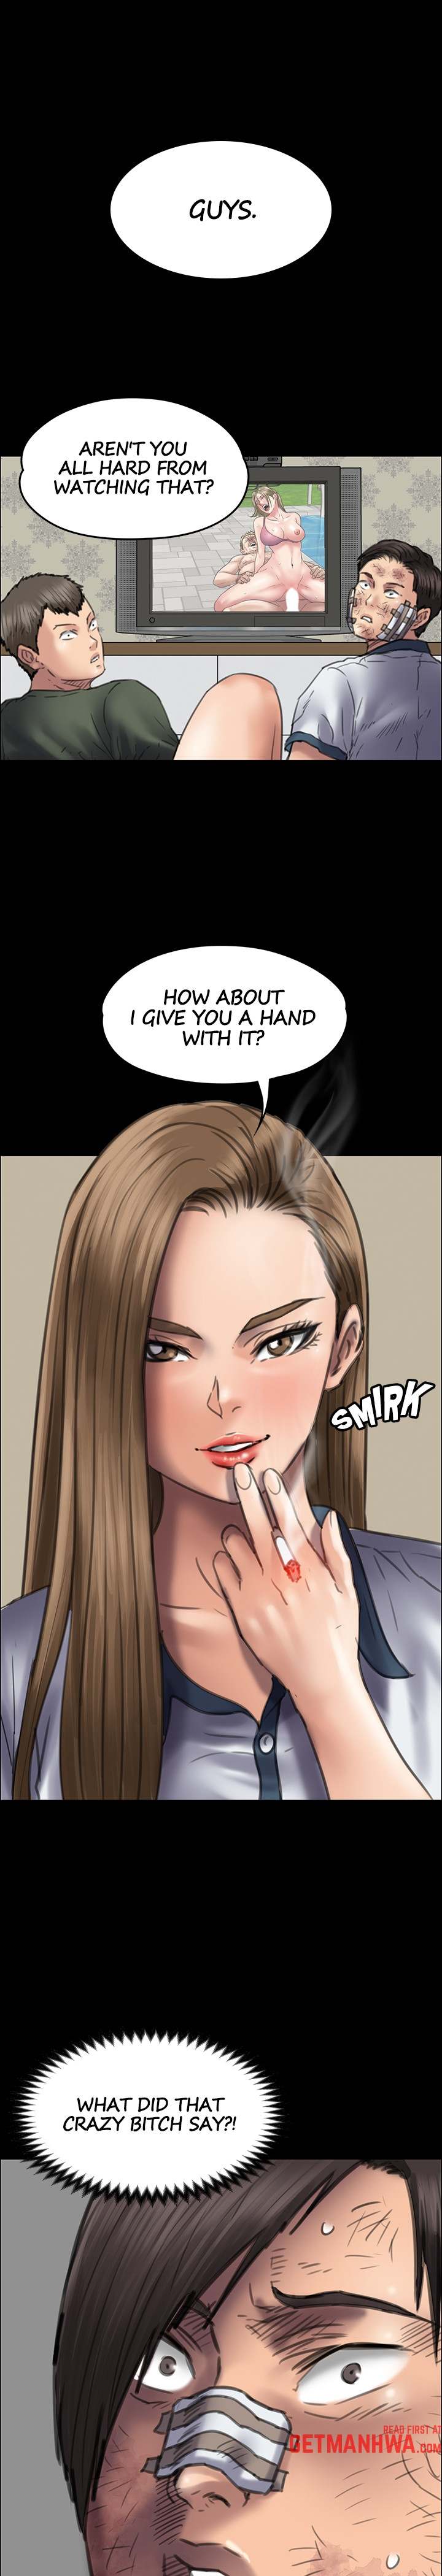 Panel Image 1 for chapter 47 of manhwa Queen Bee on read.oppai.stream